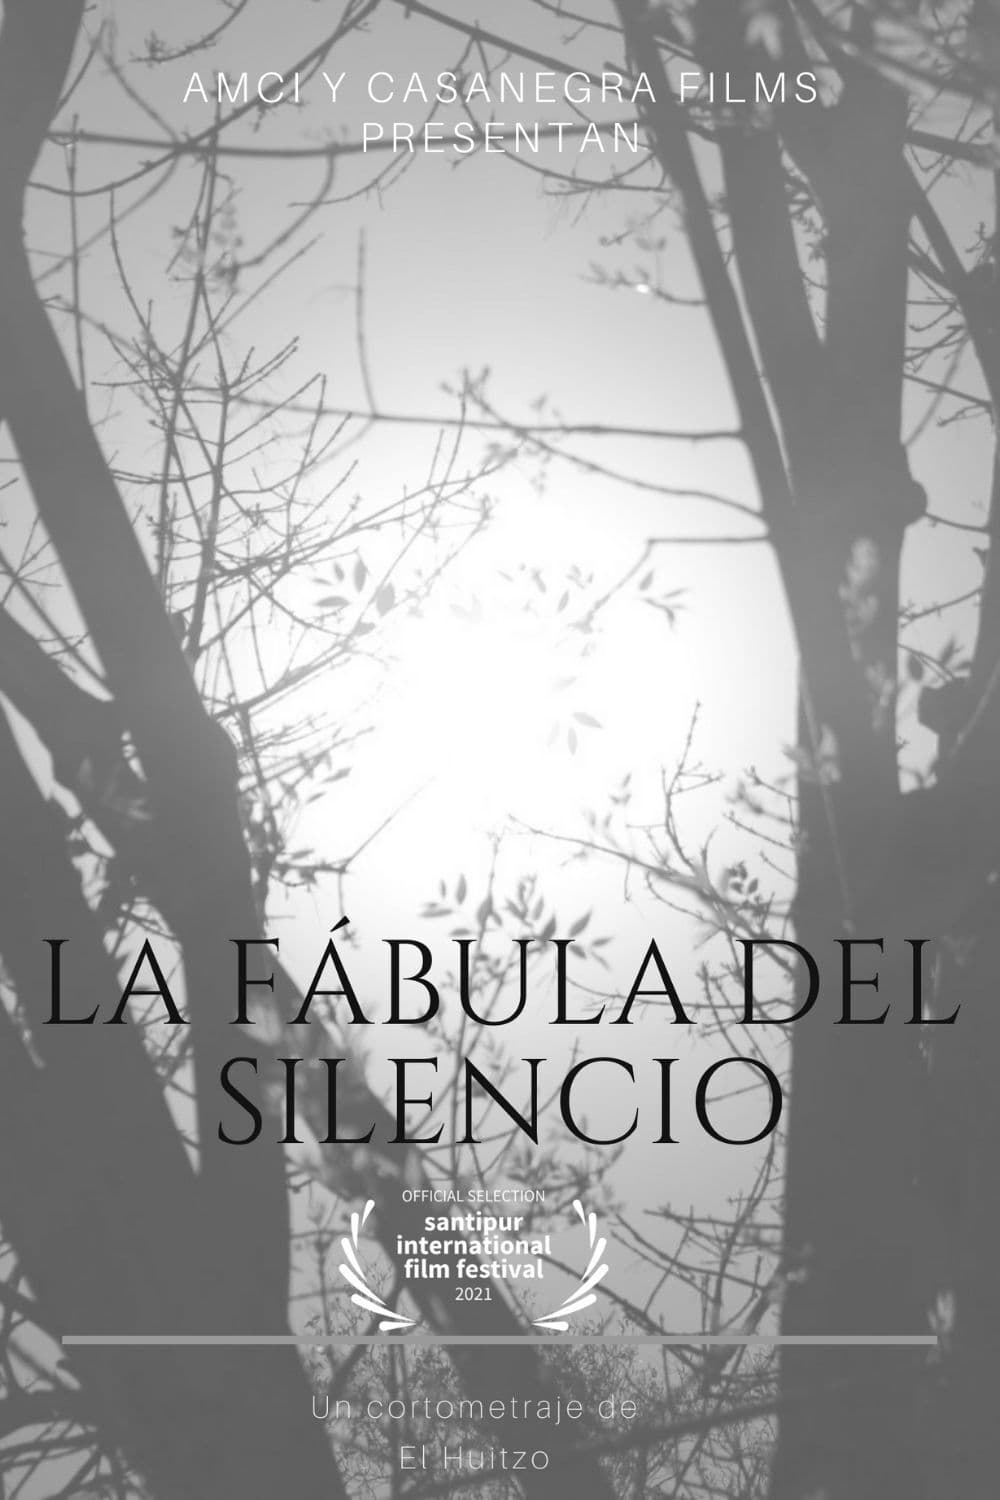 The fable of silence